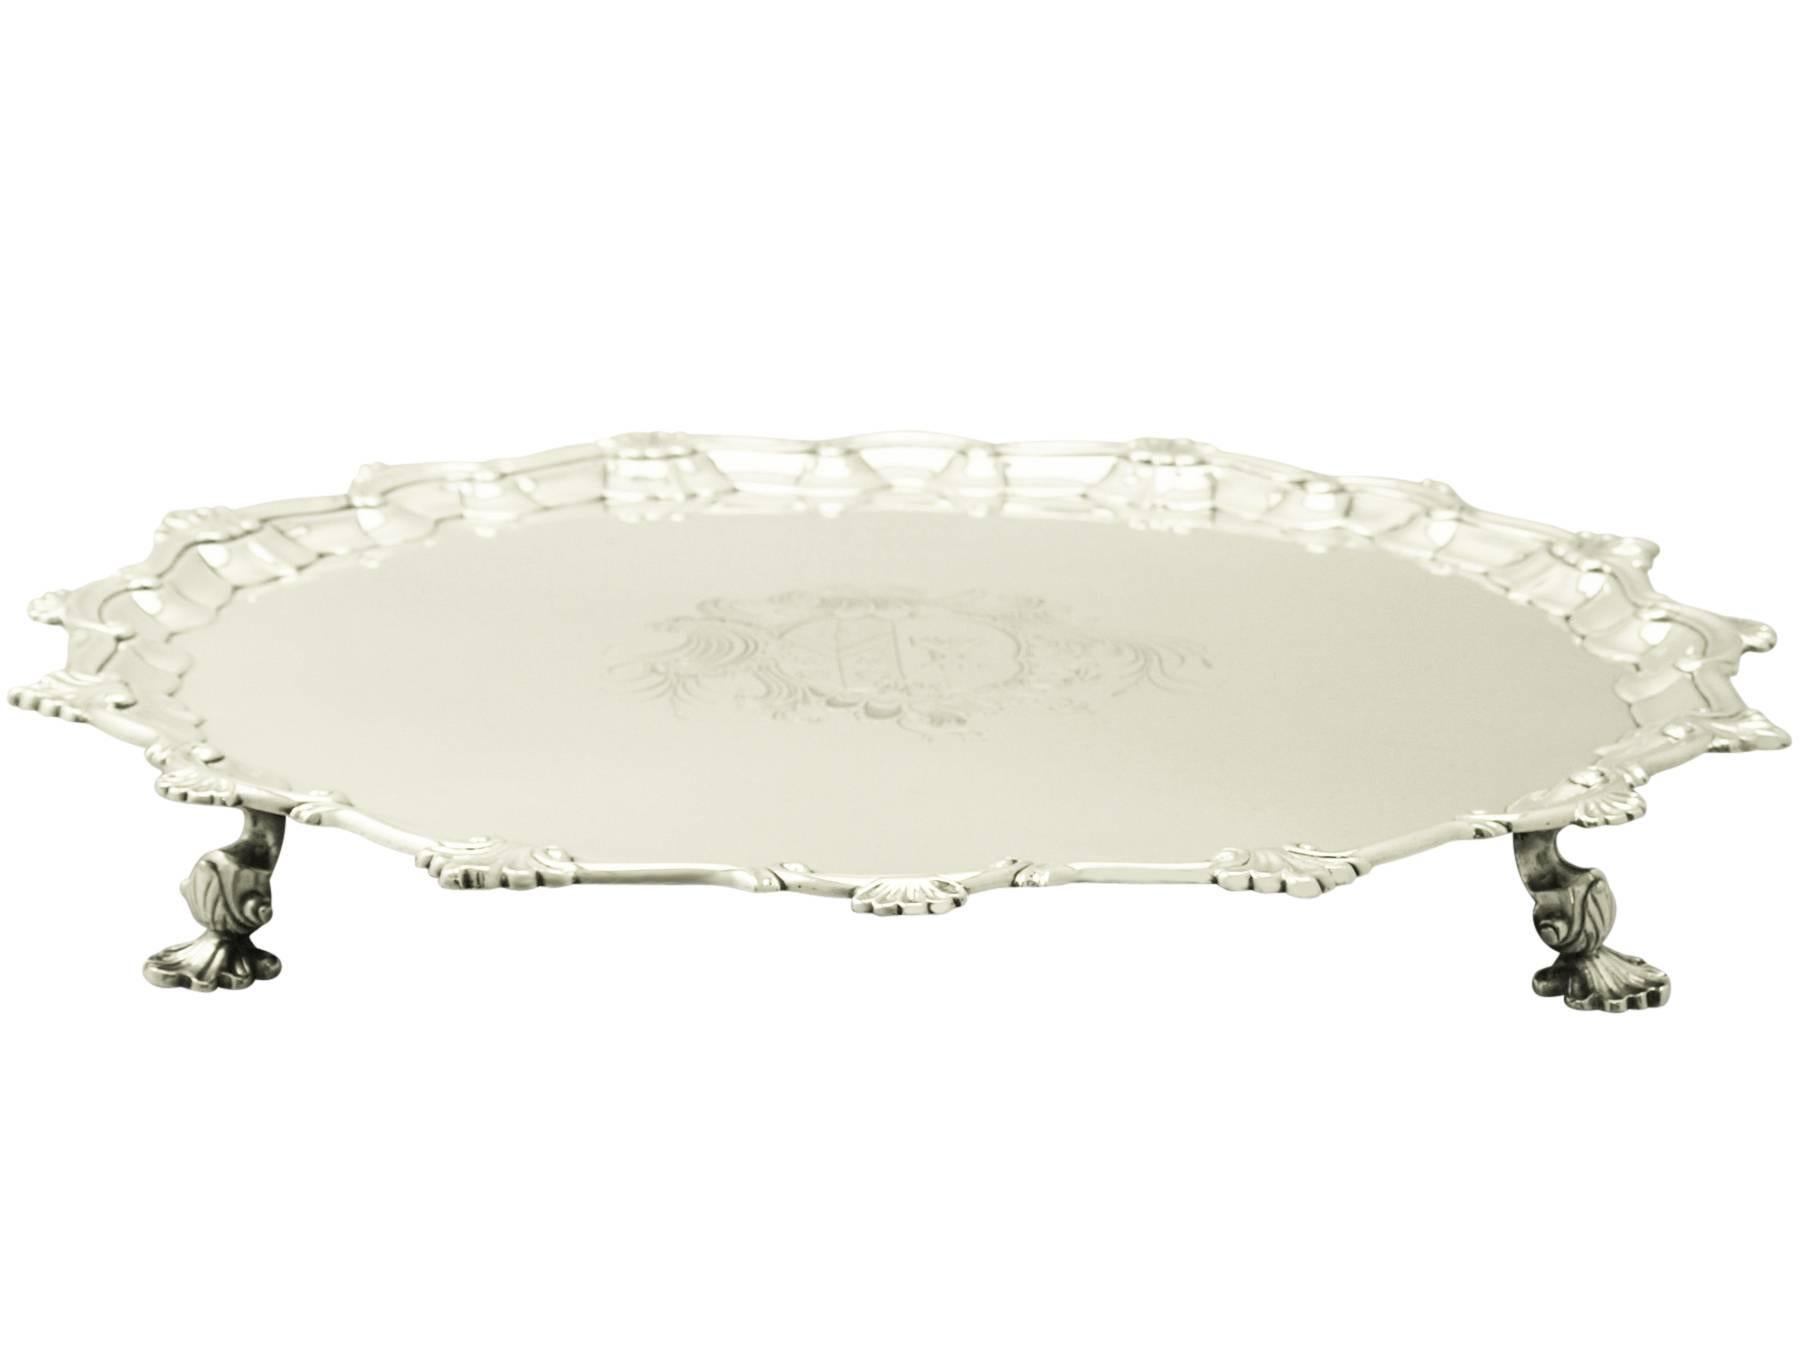 A magnificent, fine and impressive, large antique Georgian English sterling silver salver made by William Peaston; an addition to our dining silverware collection.

This magnificent antique George II sterling silver salver has a plain circular